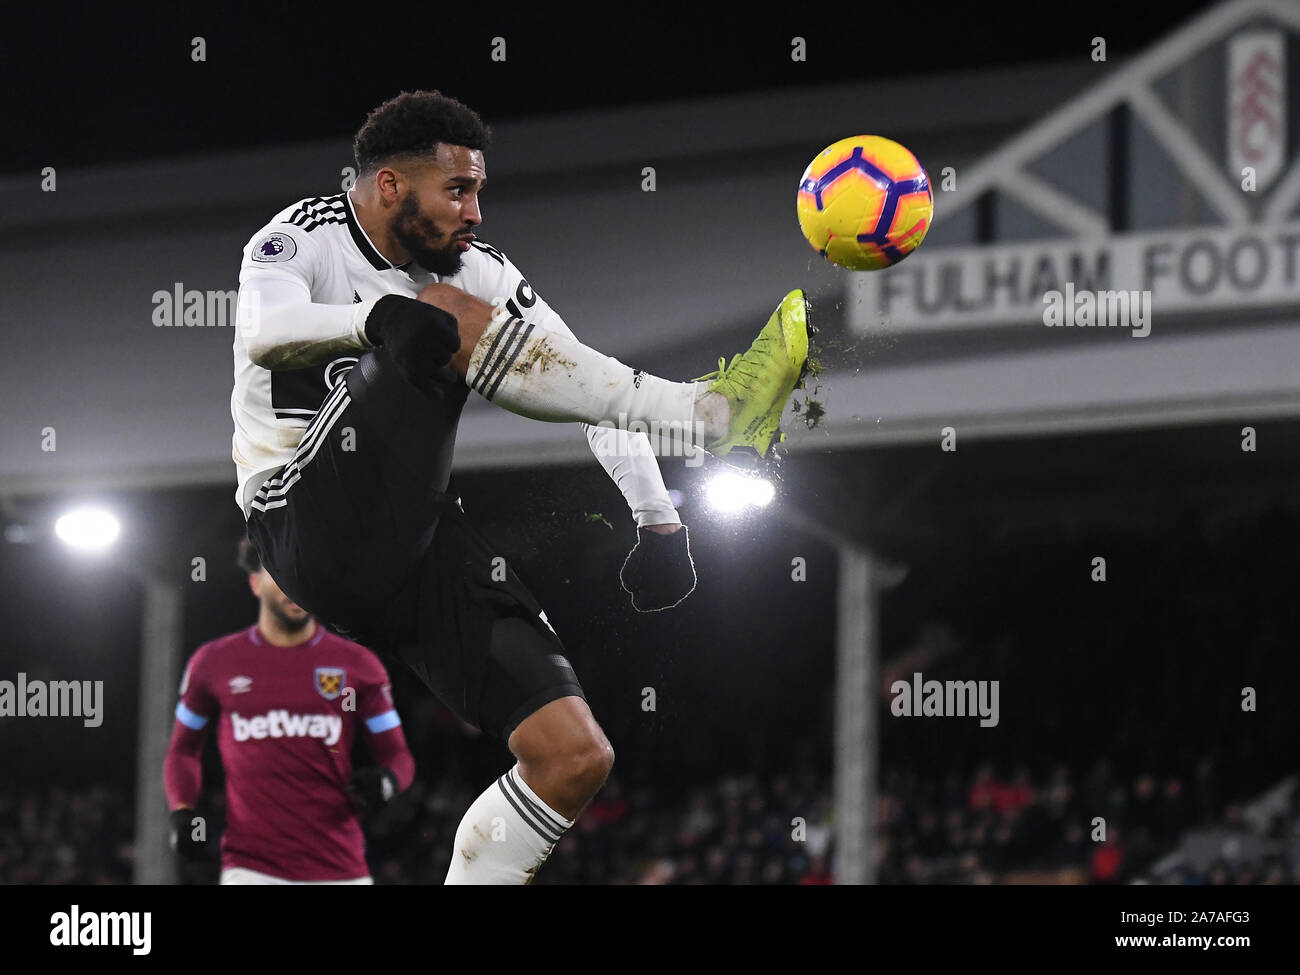 LONDON, ENGLAND - DECEMBER 15, 2018: Cyrus Sylvester Frederick Christie of Fulham pictured during the 2018/19 Premier League game between Fulham FC and West Ham United at Craven Cottage. Stock Photo